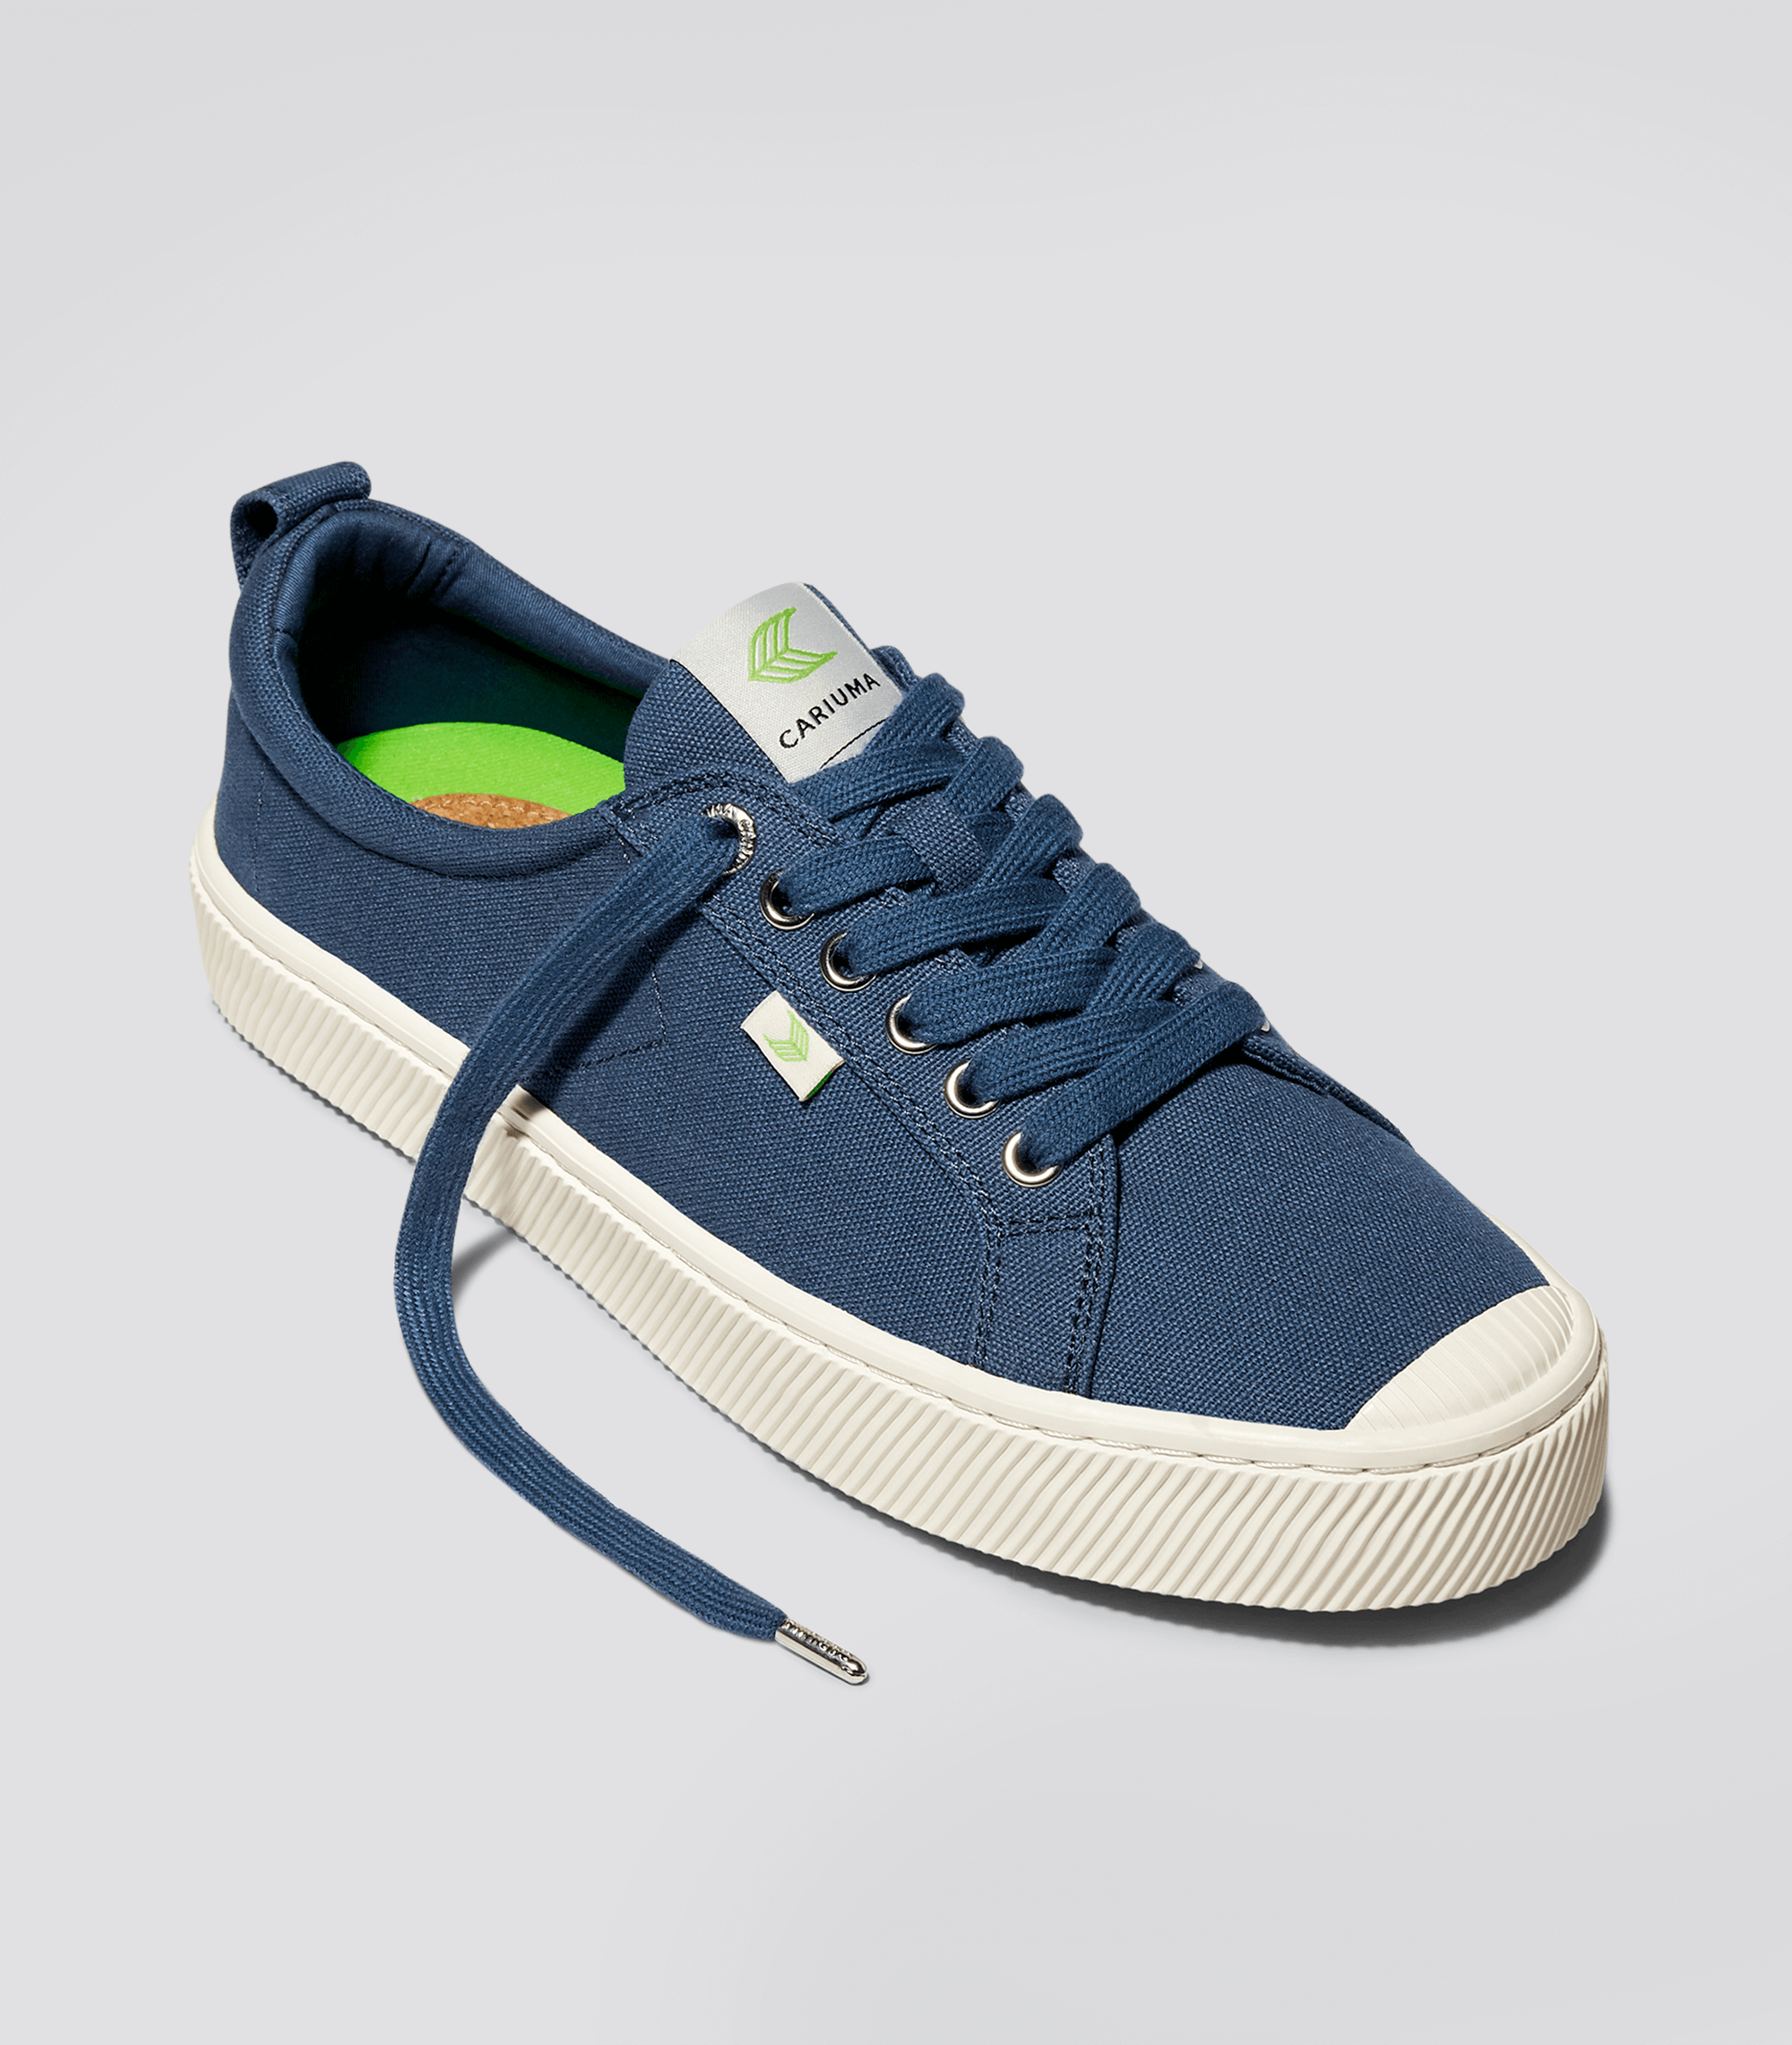 CARIUMA: Blue Canvas, Suede and Leather Sneakers